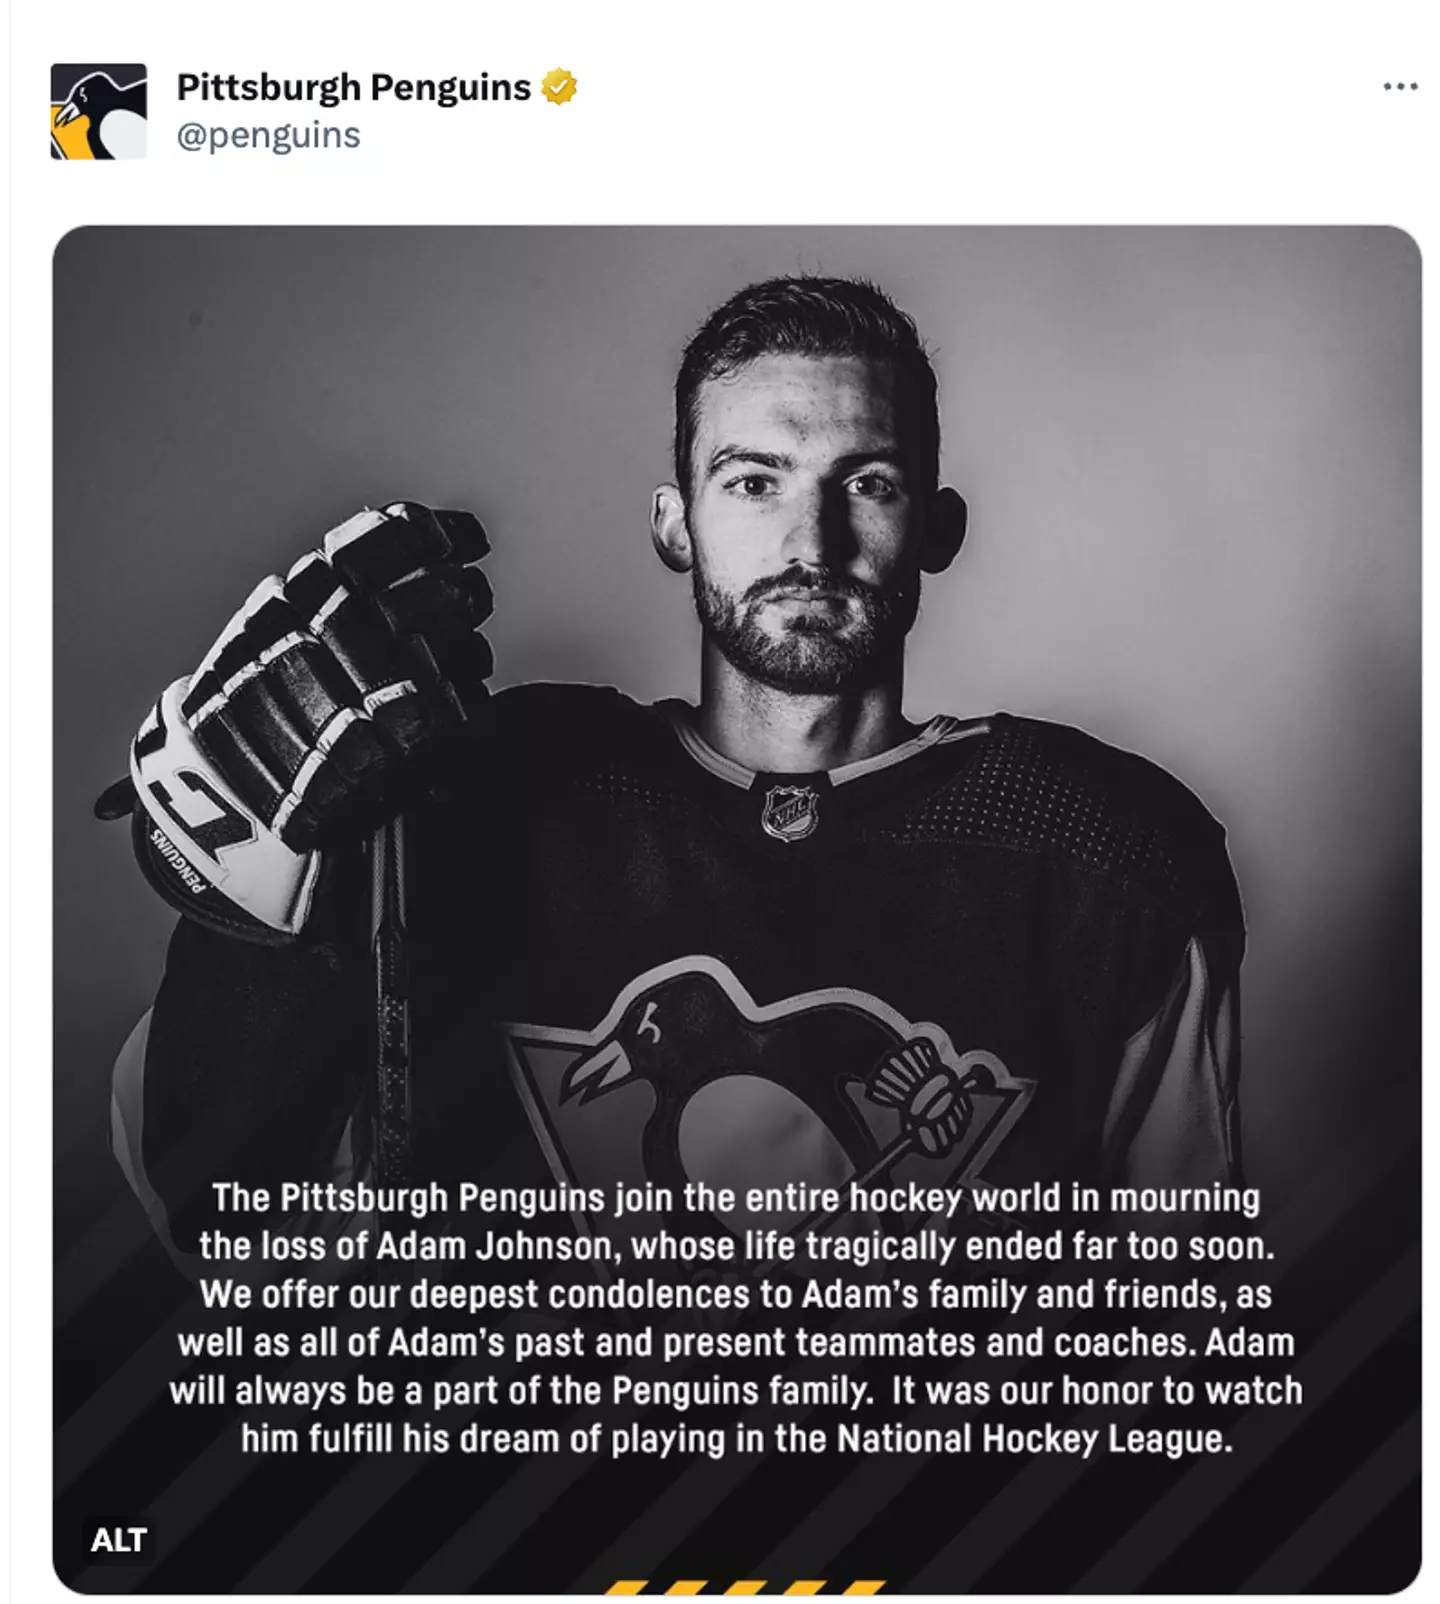 Tributes have begun to pour in for the hockey player.